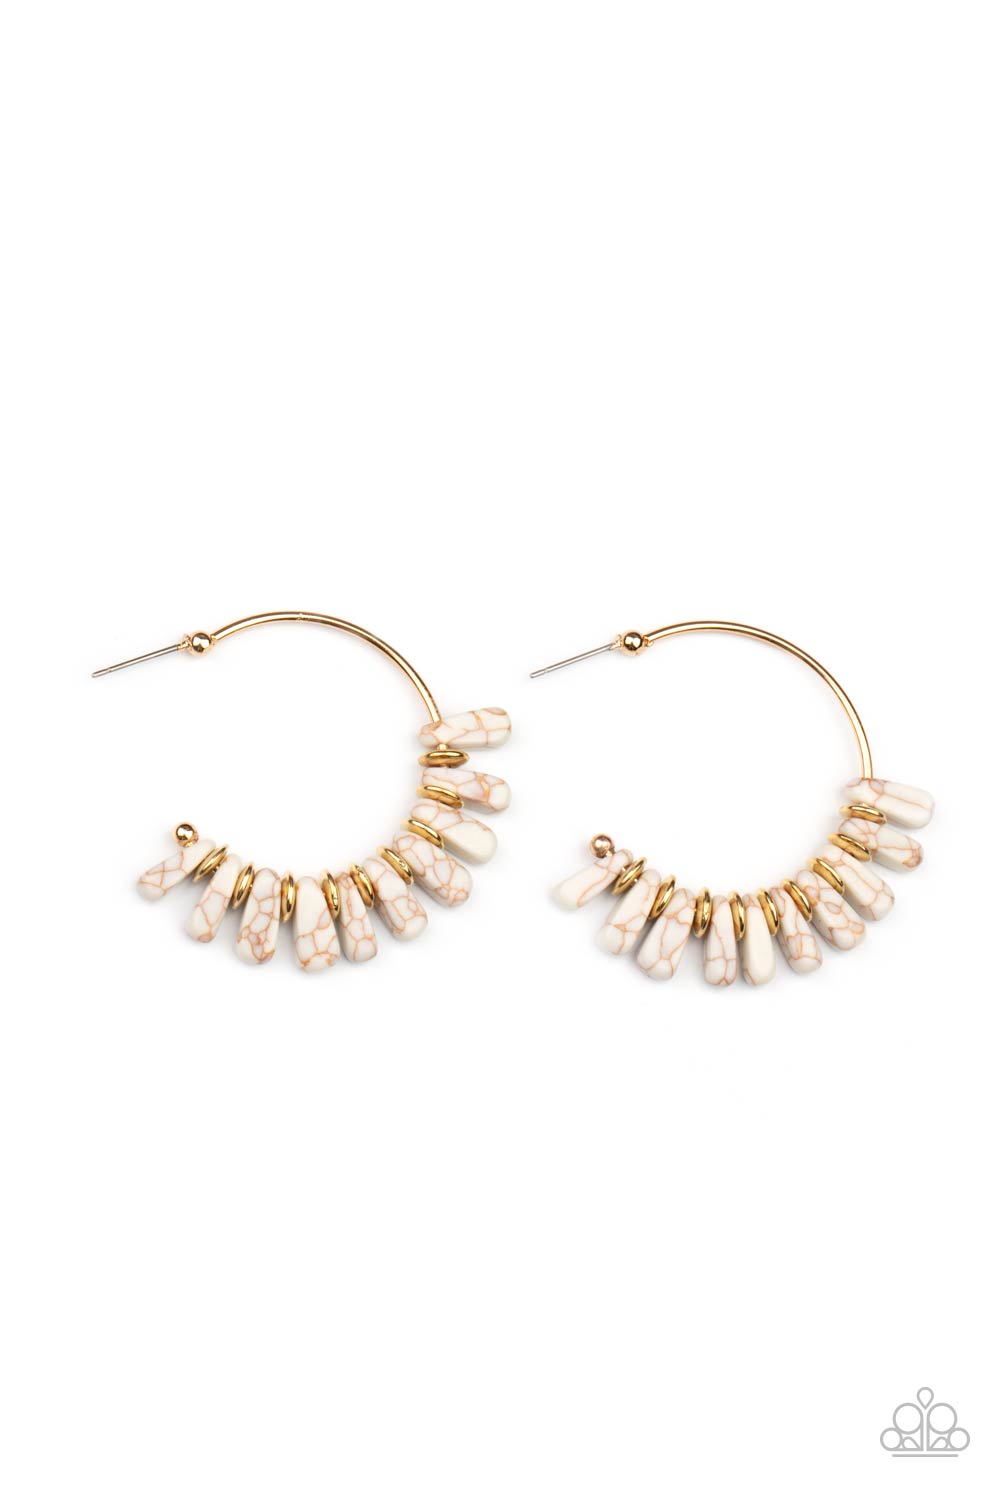 Poshly Primitive White Hoop Earring - Paparazzi Accessories  Flared white stones and dainty gold discs alternate along a dainty gold hoop, creating an earthy fringe. Earring attaches to a standard post fitting. Hoop measures approximately 1 1/2" in diameter.  Sold as one pair of hoop earrings.